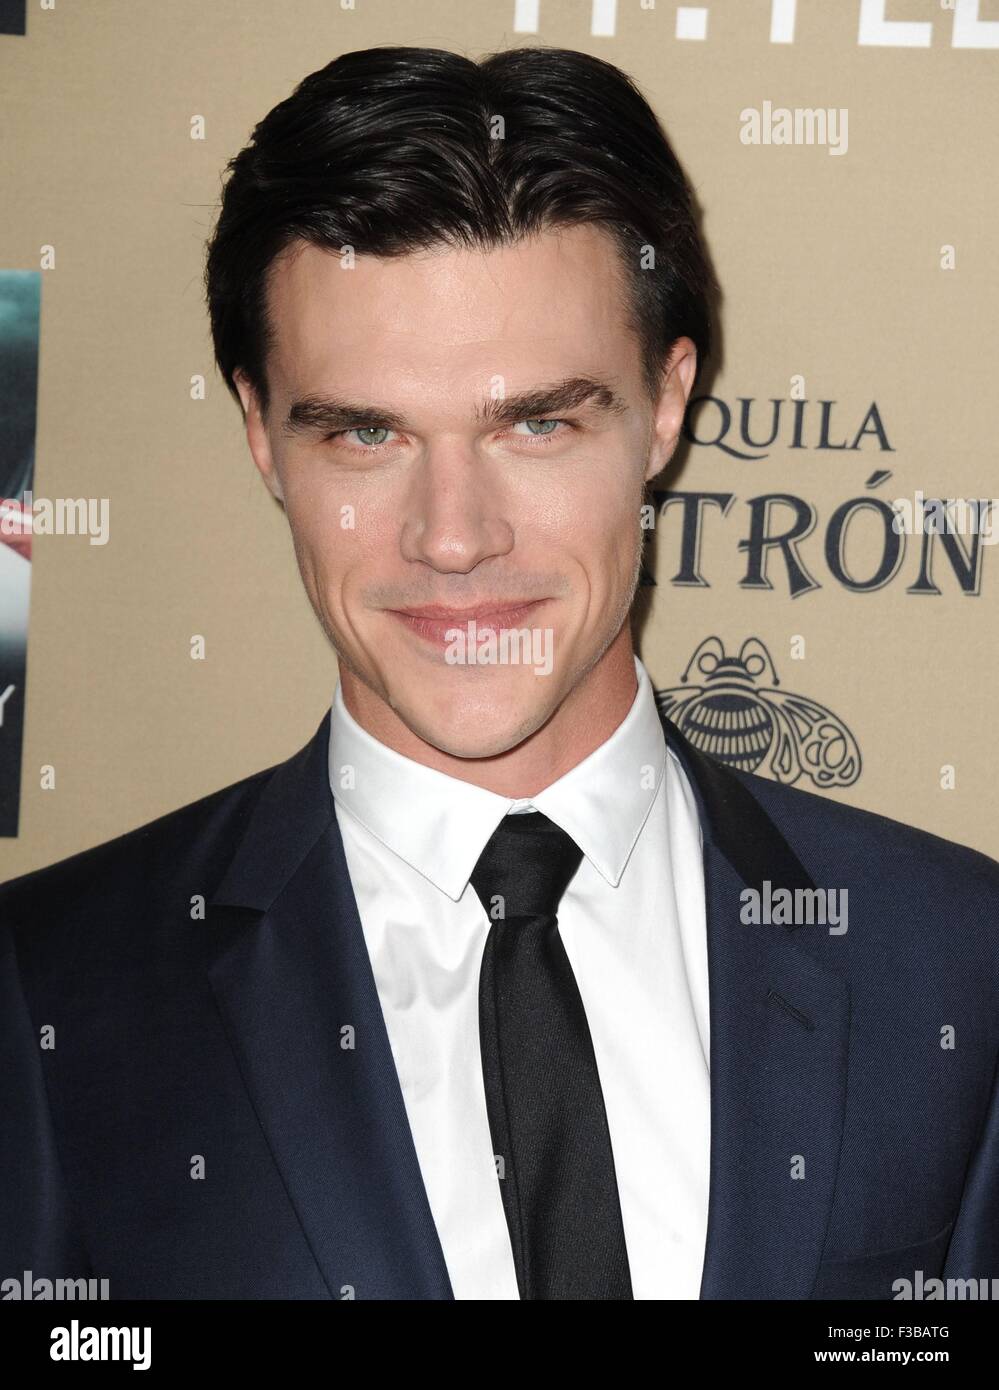 Finn Wittrock at arrivals for AMERICAN HORROR STORY: HOTEL Season Premiere, Regal Cinemas L.A. LIVE Stadium 14, Los Angeles, CA October 3, 2015. Photo By: Dee Cercone/Everett Collection Stock Photo